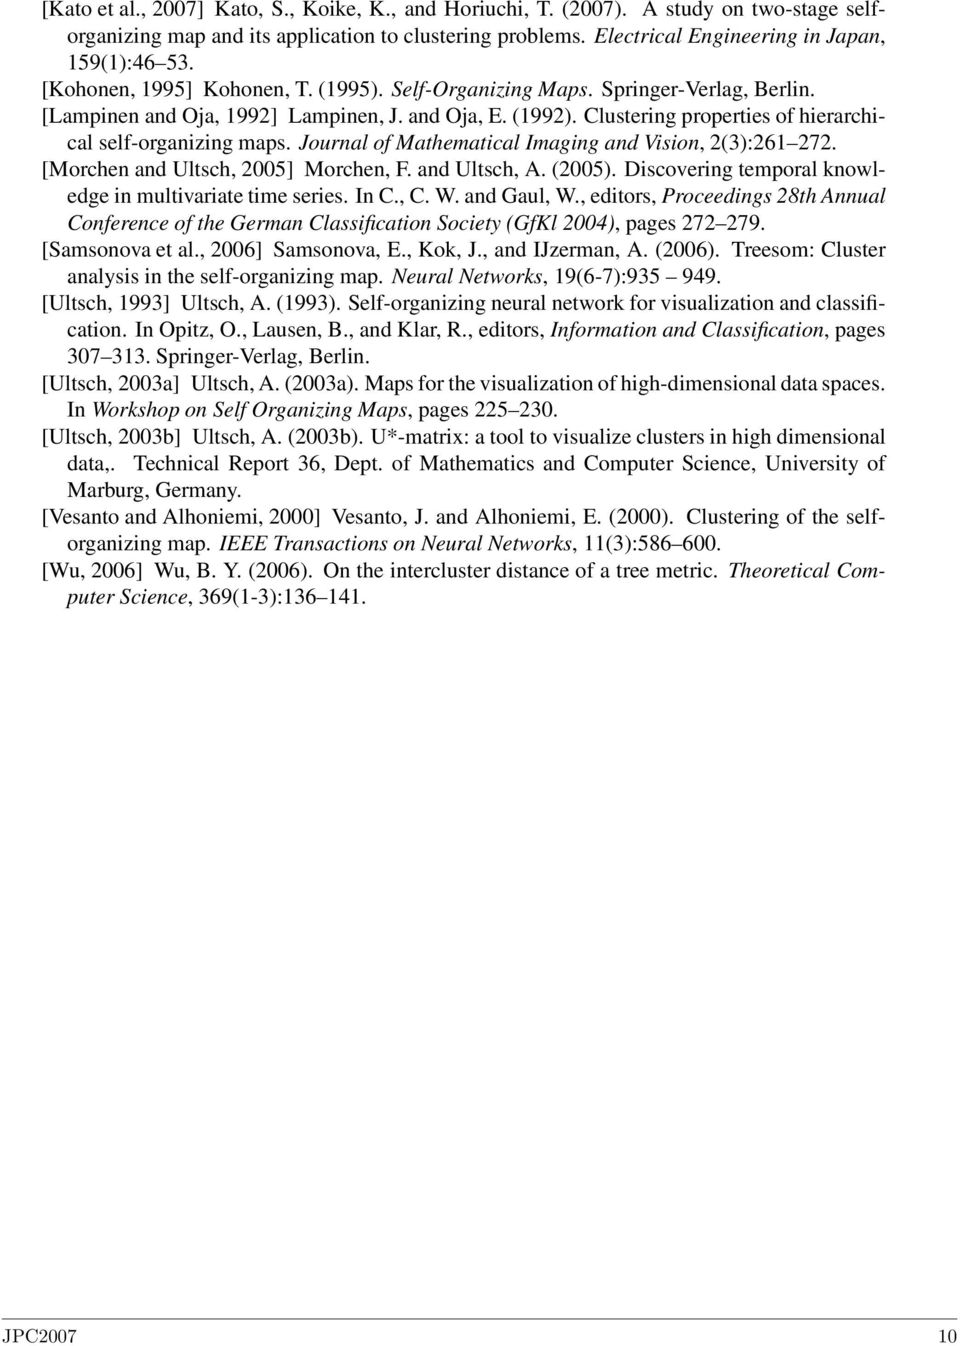 Journal of Mathematical Imaging and Vision, 2(3):261 272. [Morchen and Ultsch, 2005] Morchen, F. and Ultsch, A. (2005). Discovering temporal knowledge in multivariate time series. In C., C. W.